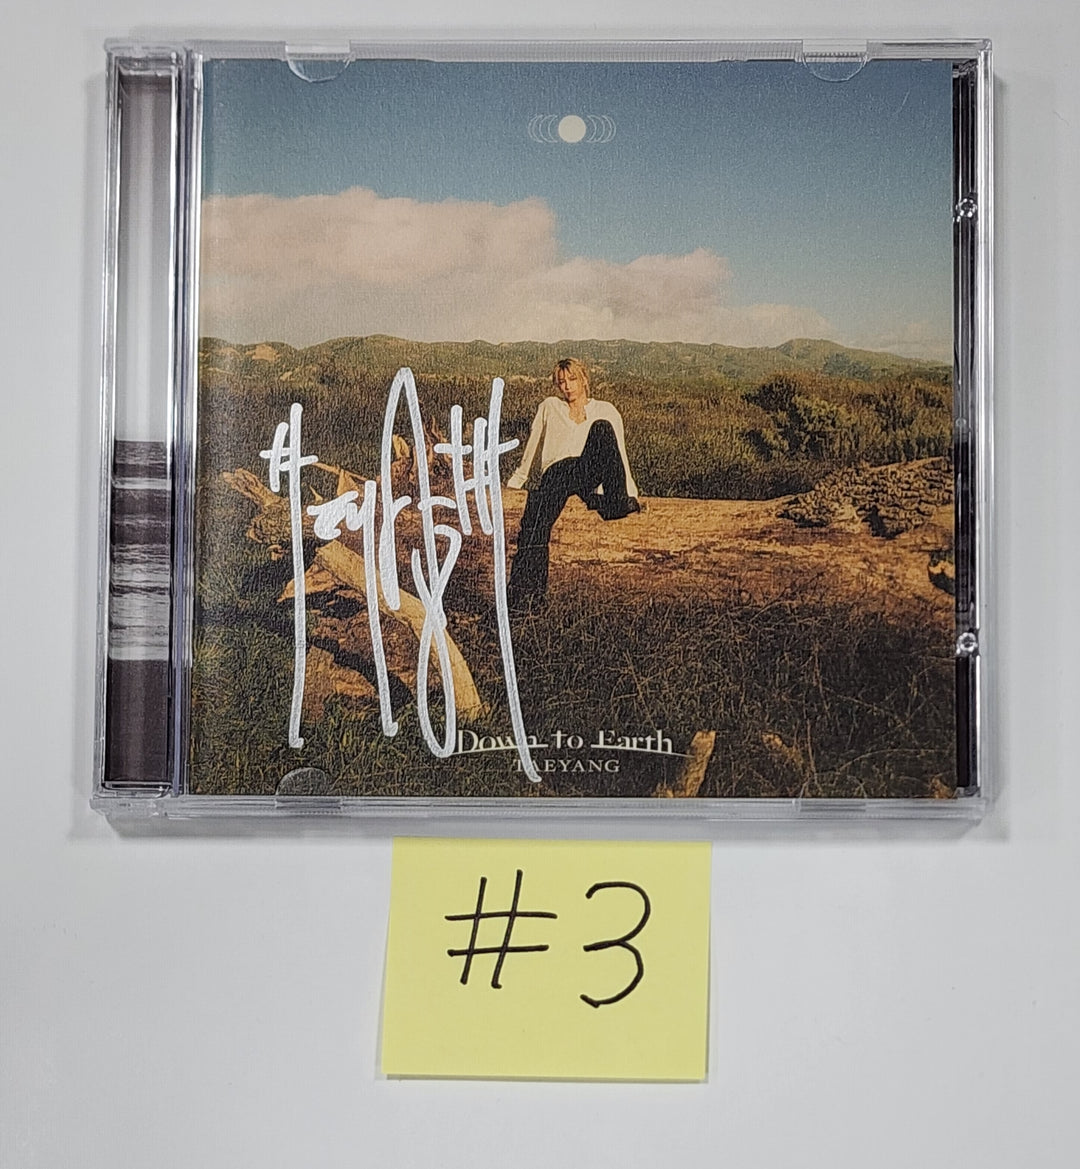 TAEYANG "Down to Earth" - Hand Autographed(Signed) Promo Album